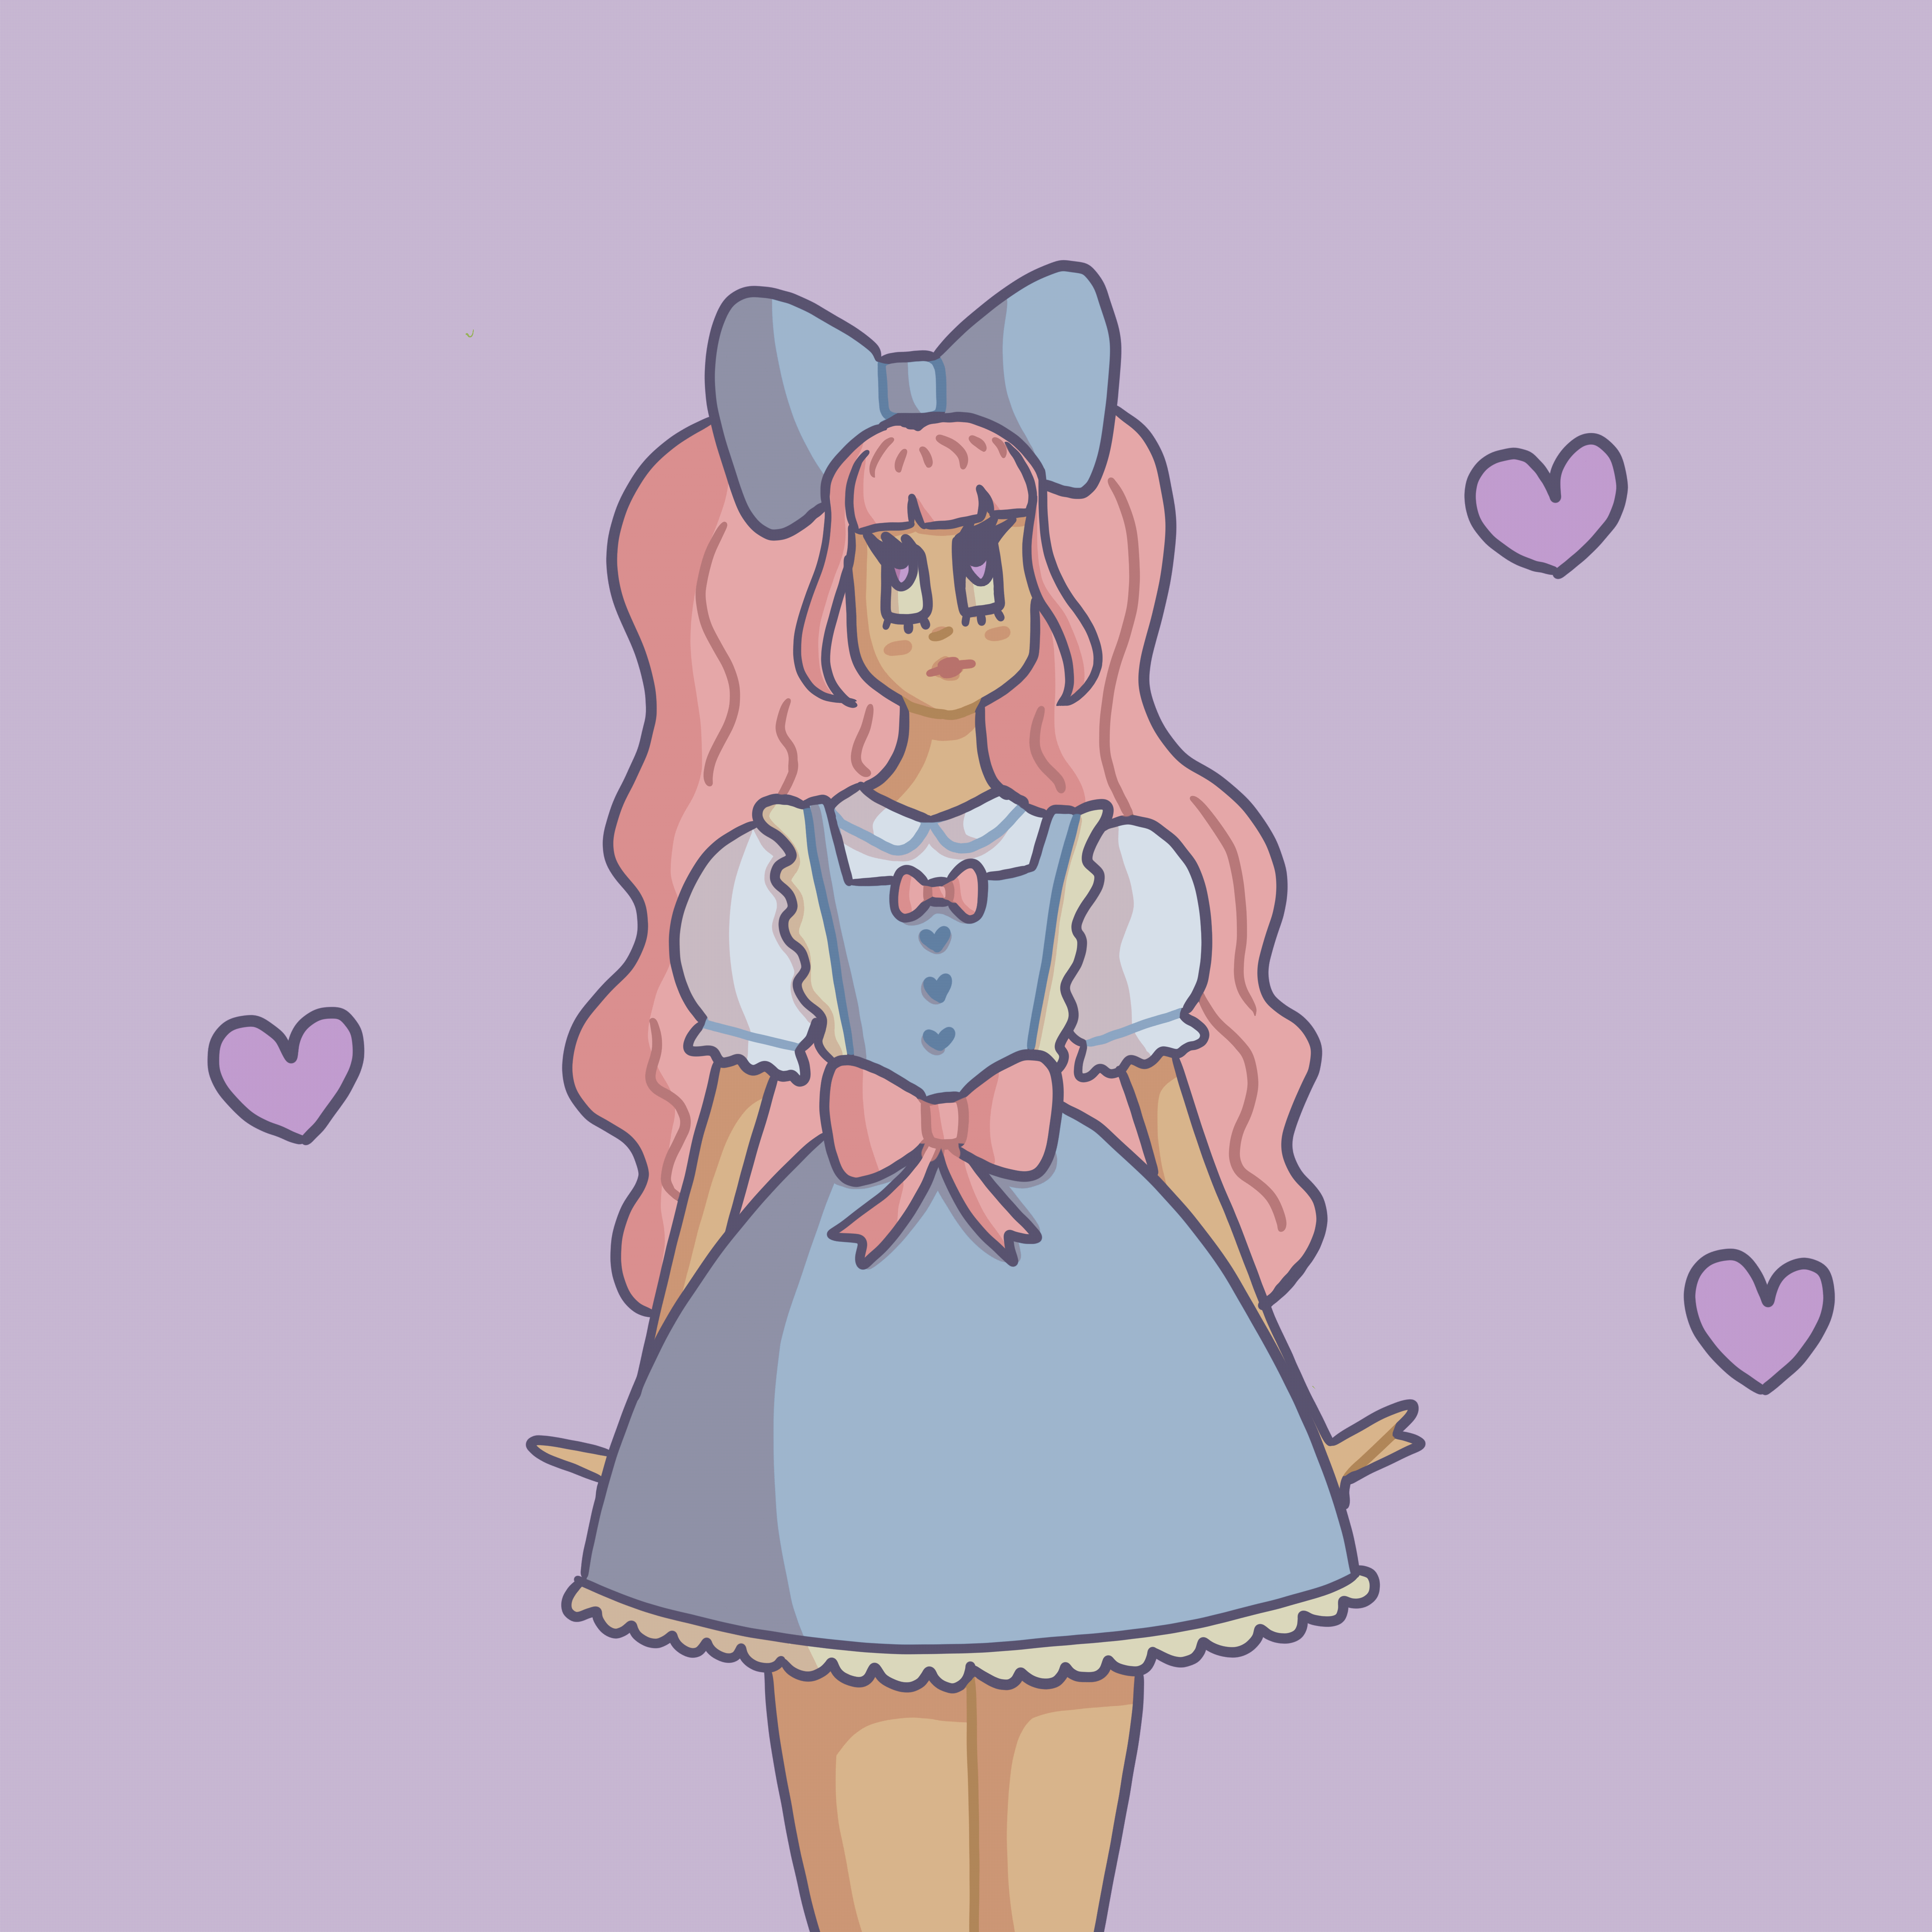 drawing of a girl in lolita with purple animated hearts around her